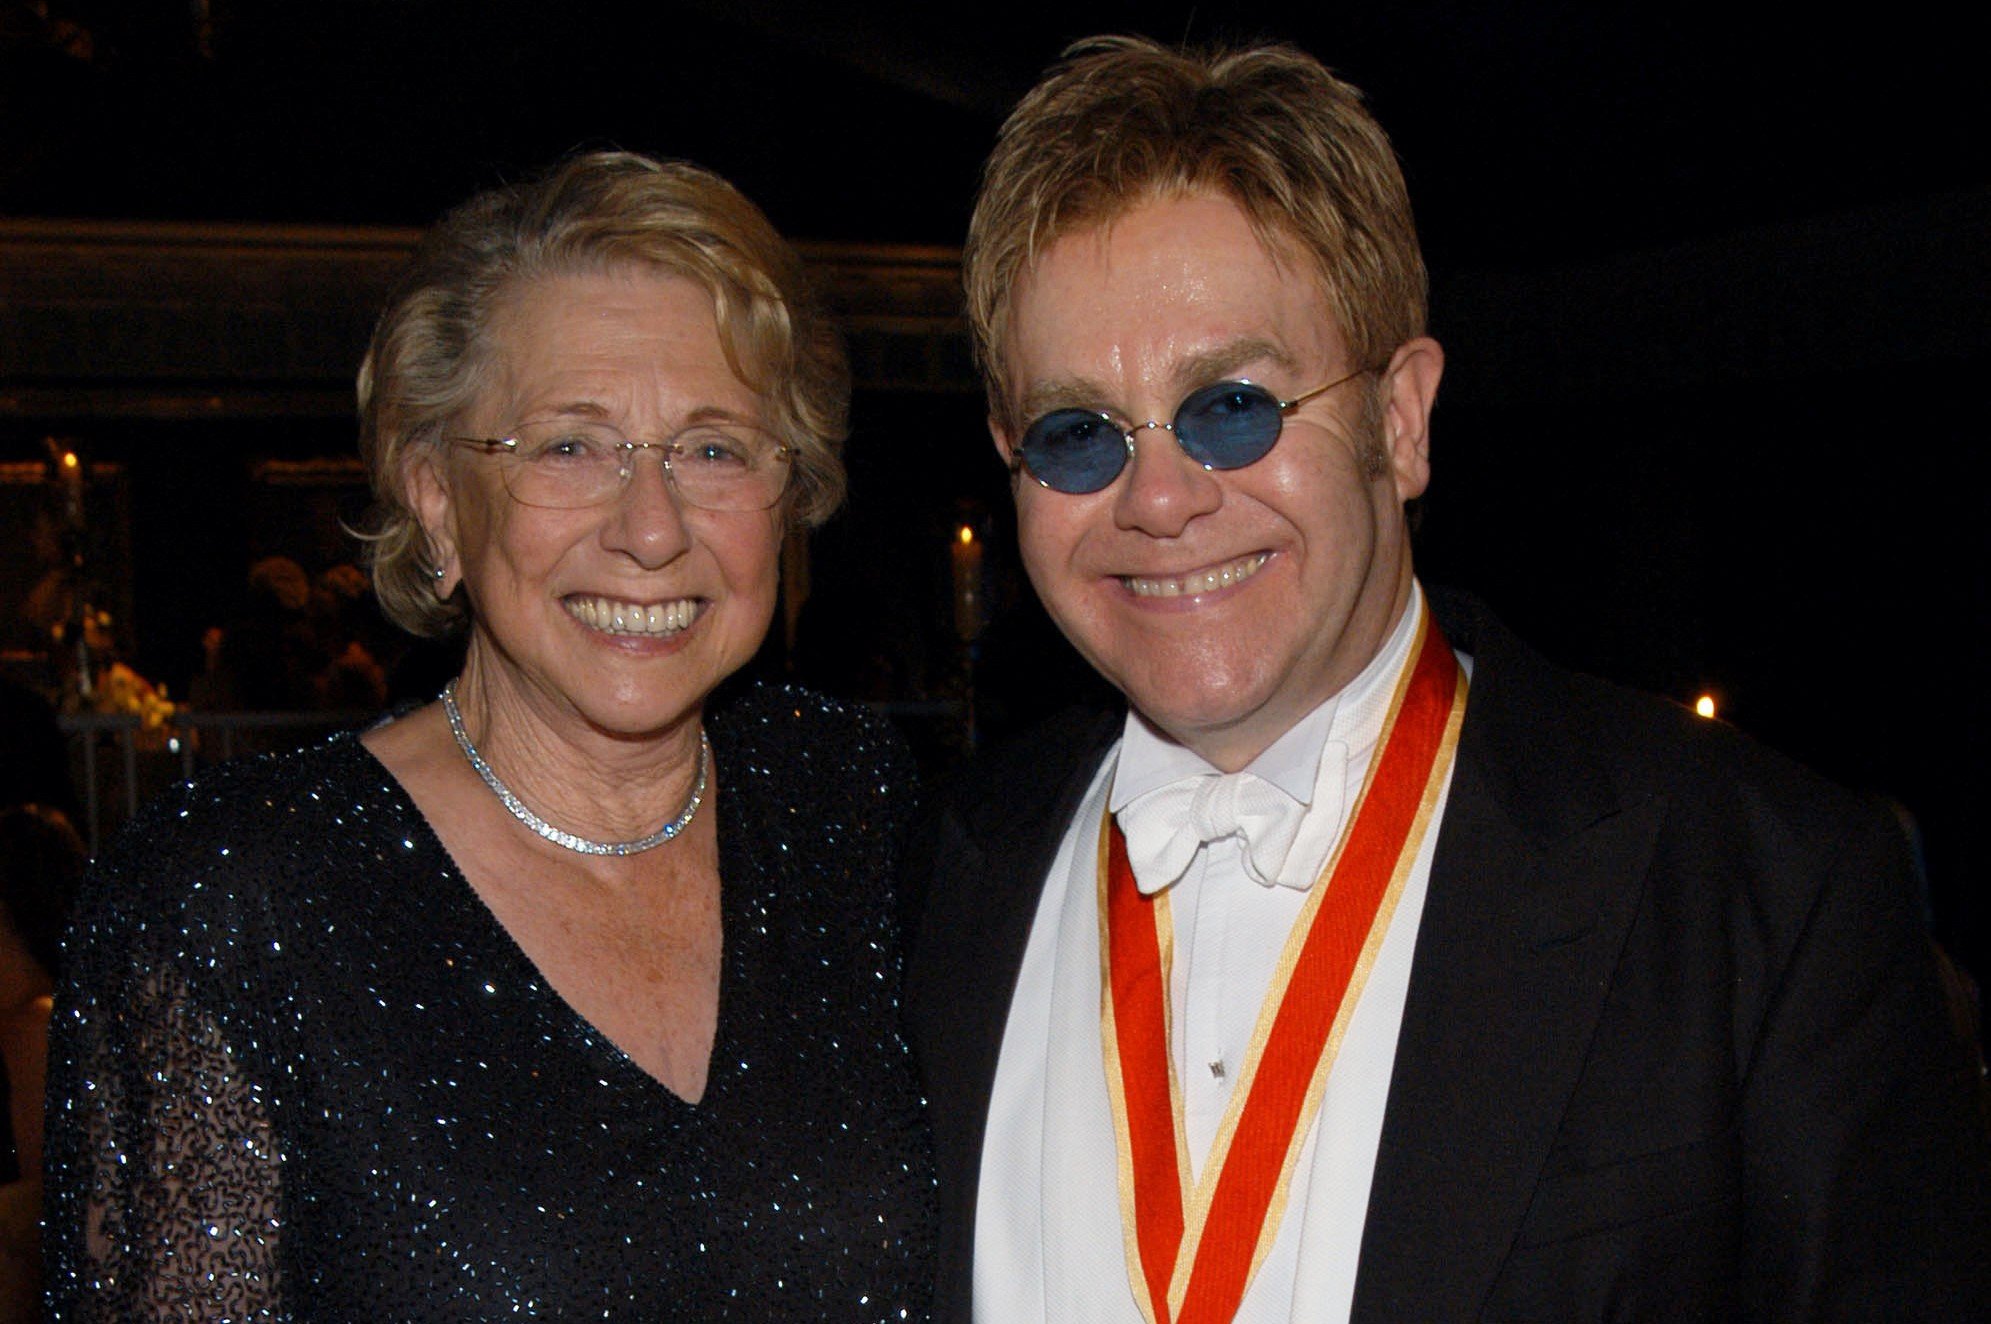 Elton John and his mother stand next to each other and smile. He wears sunglasses.